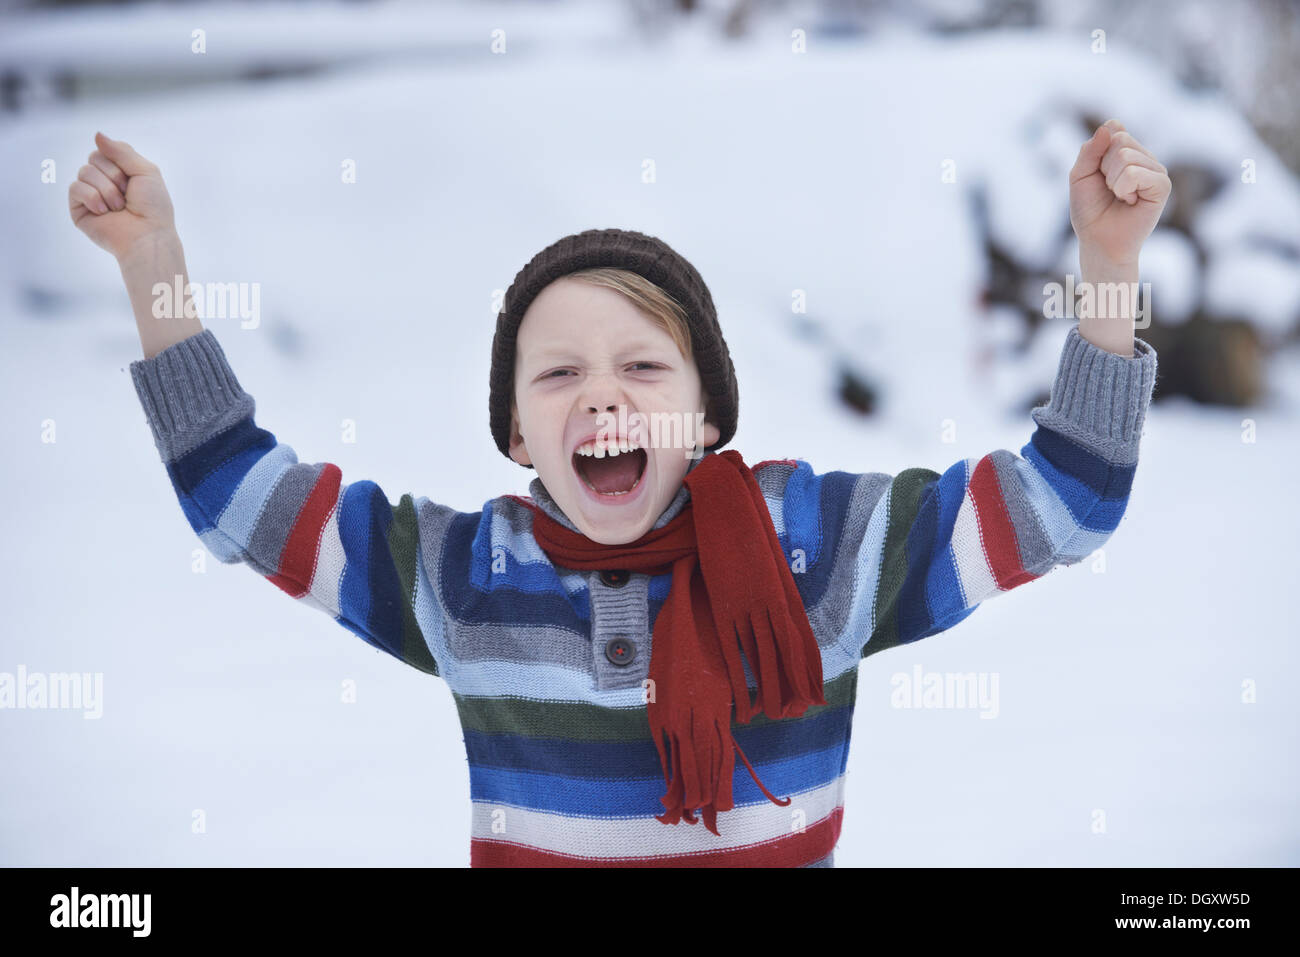 Boy in a winter sweater and a scarf, shouting with fists raised Stock Photo